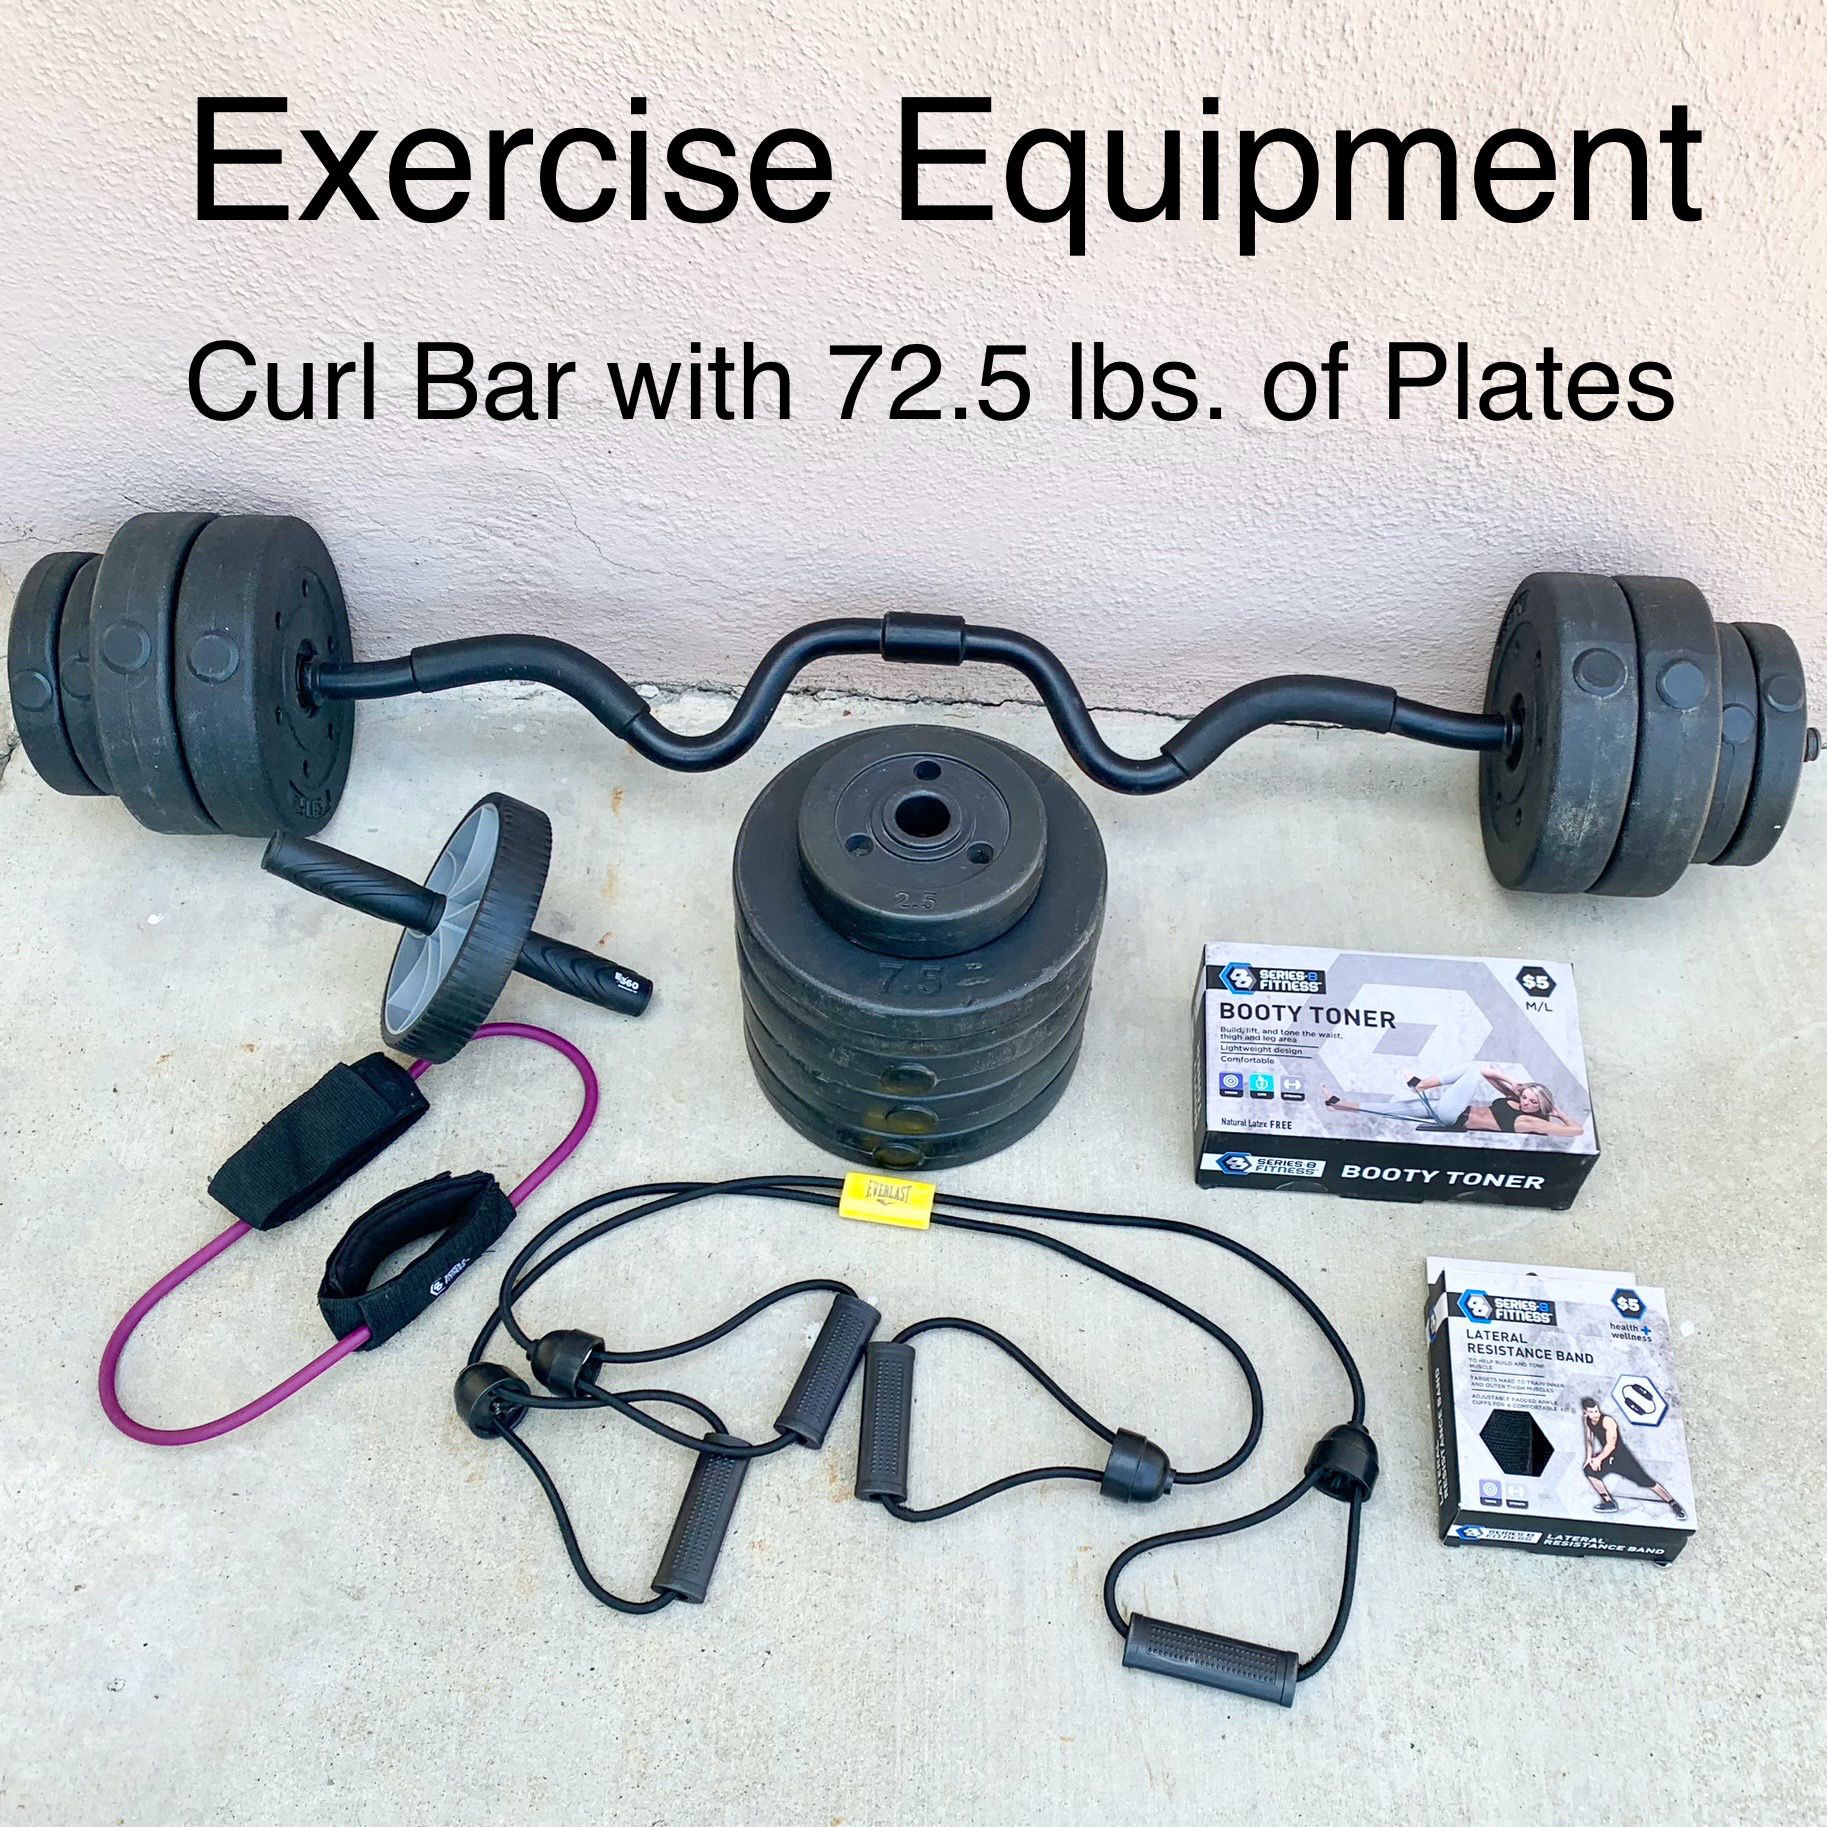 Curl Bar and Weights (72.5 Lbs.) + Accessories 